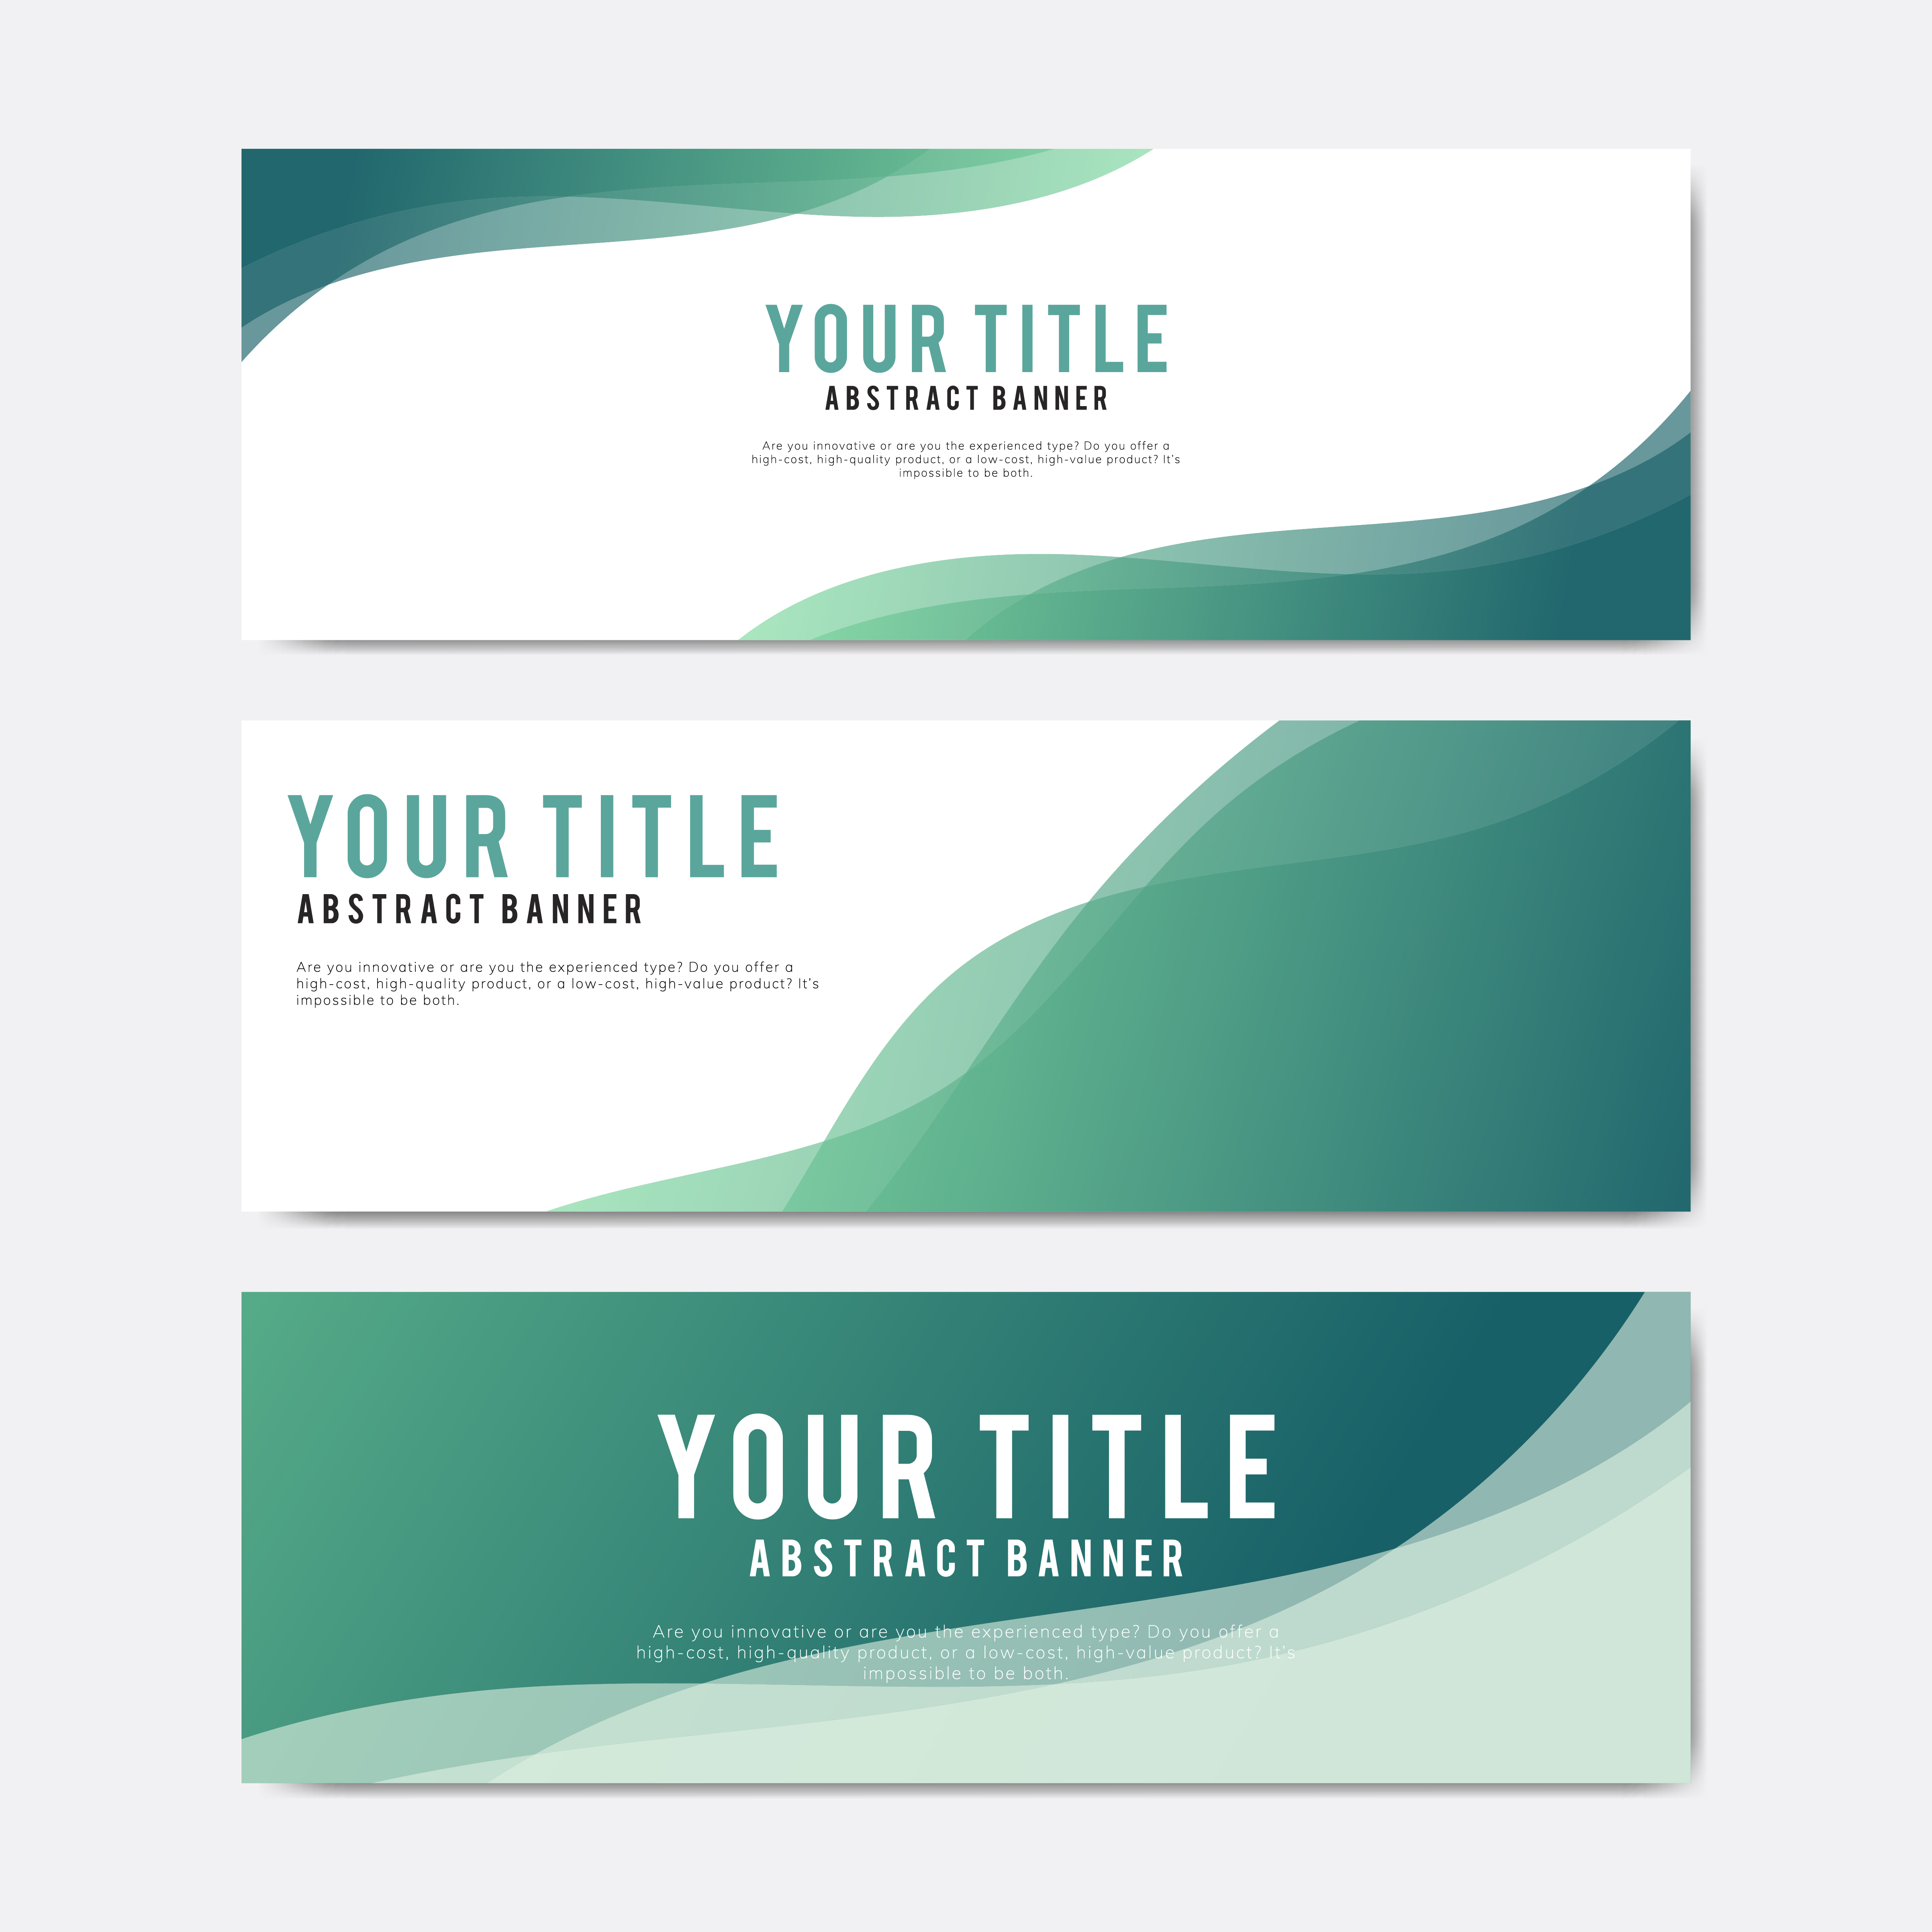 Colorful and abstract banner design templates - Download Free Vectors